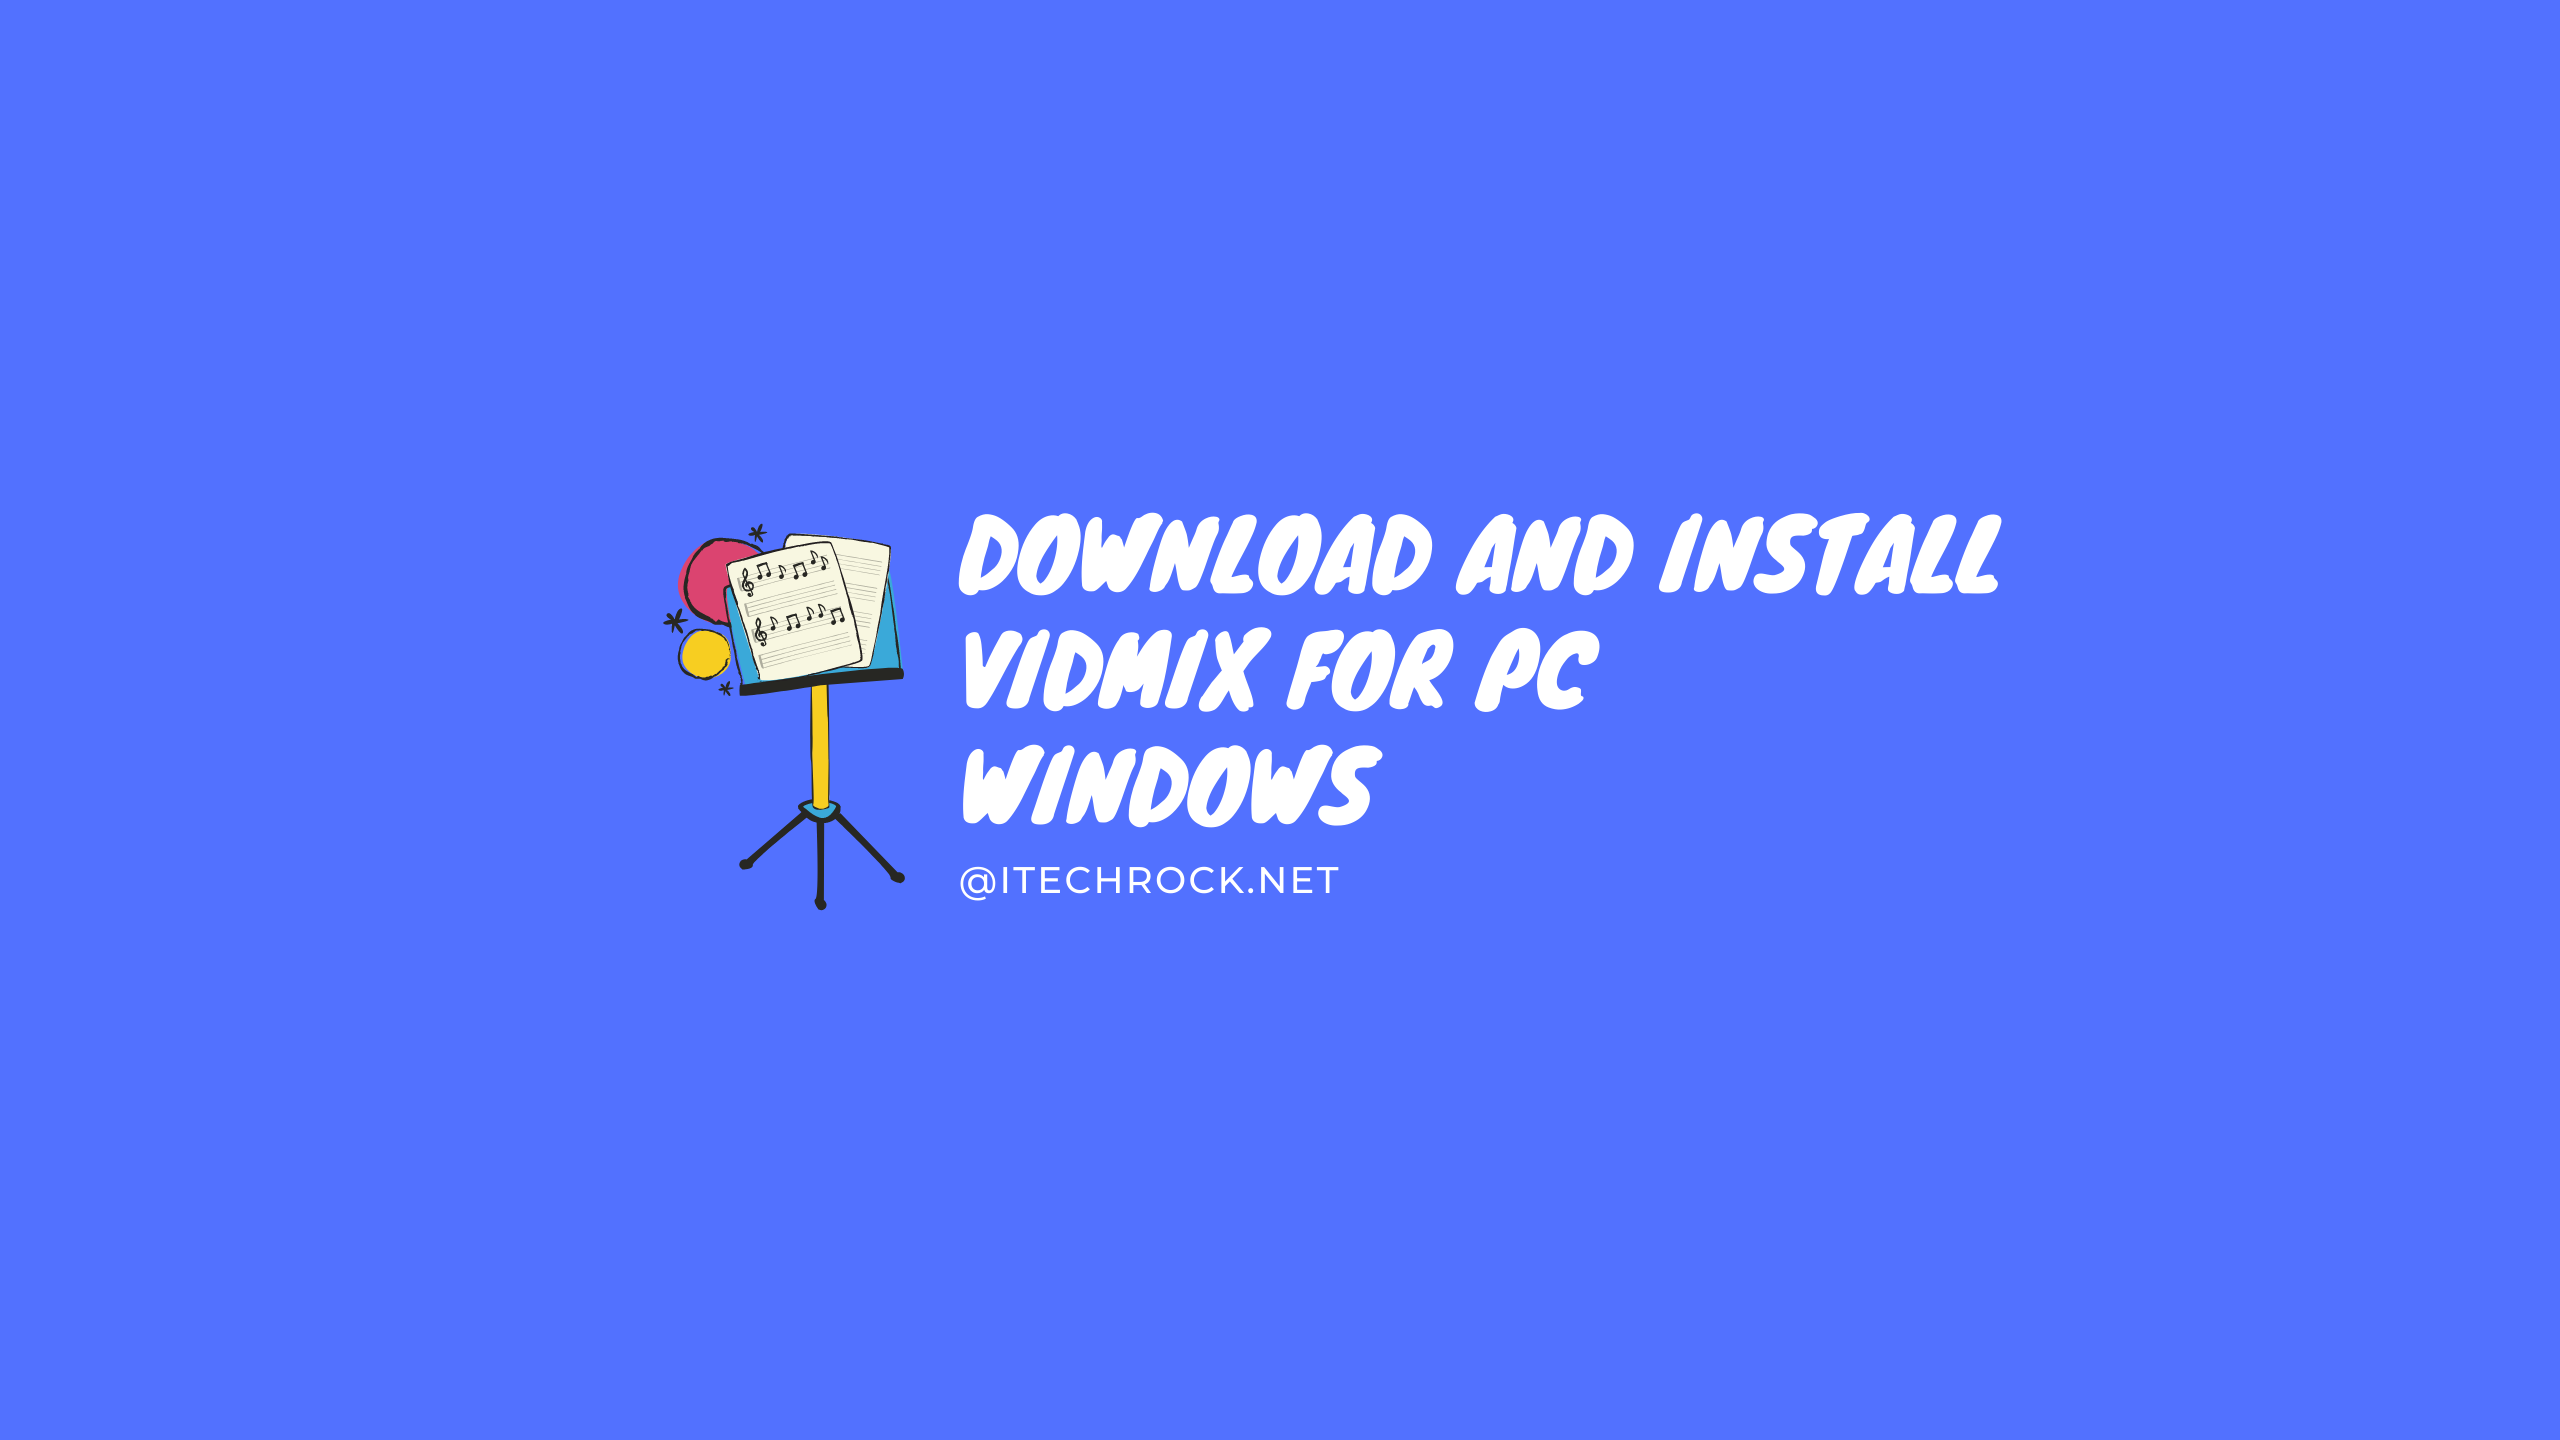 Download Vidmix for PC and Install on Windows 7, 8, 10, Mac